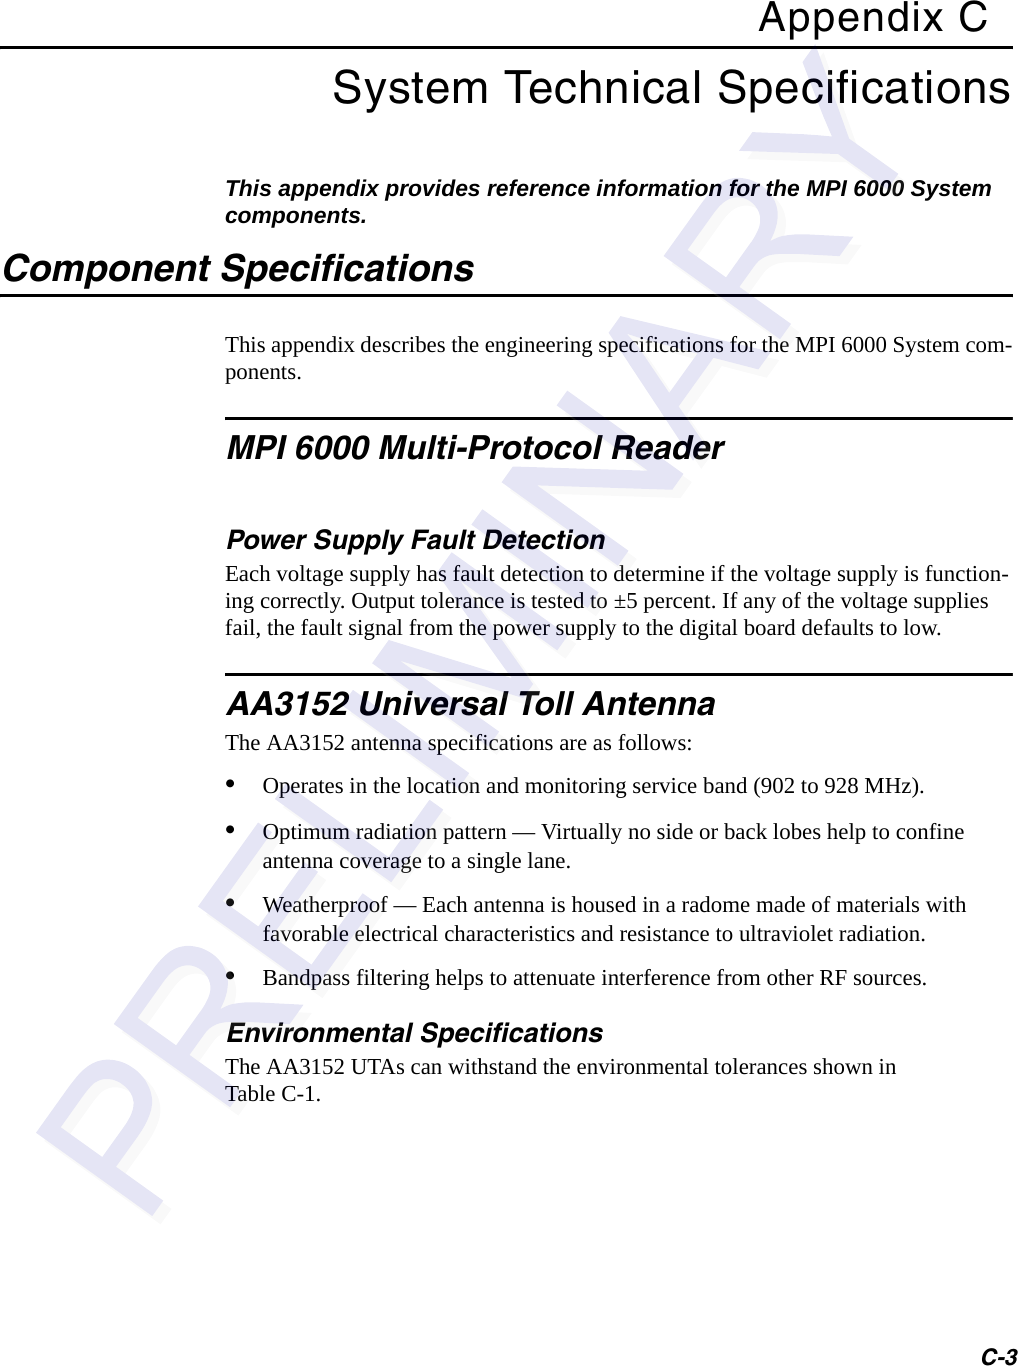 C-3Appendix CSystem Technical SpecificationsThis appendix provides reference information for the MPI 6000 System components.Component SpecificationsThis appendix describes the engineering specifications for the MPI 6000 System com-ponents.MPI 6000 Multi-Protocol ReaderPower Supply Fault DetectionEach voltage supply has fault detection to determine if the voltage supply is function-ing correctly. Output tolerance is tested to ±5 percent. If any of the voltage supplies fail, the fault signal from the power supply to the digital board defaults to low. AA3152 Universal Toll AntennaThe AA3152 antenna specifications are as follows:•Operates in the location and monitoring service band (902 to 928 MHz).•Optimum radiation pattern — Virtually no side or back lobes help to confine antenna coverage to a single lane.•Weatherproof — Each antenna is housed in a radome made of materials with favorable electrical characteristics and resistance to ultraviolet radiation.•Bandpass filtering helps to attenuate interference from other RF sources.Environmental SpecificationsThe AA3152 UTAs can withstand the environmental tolerances shown in Table C-1.